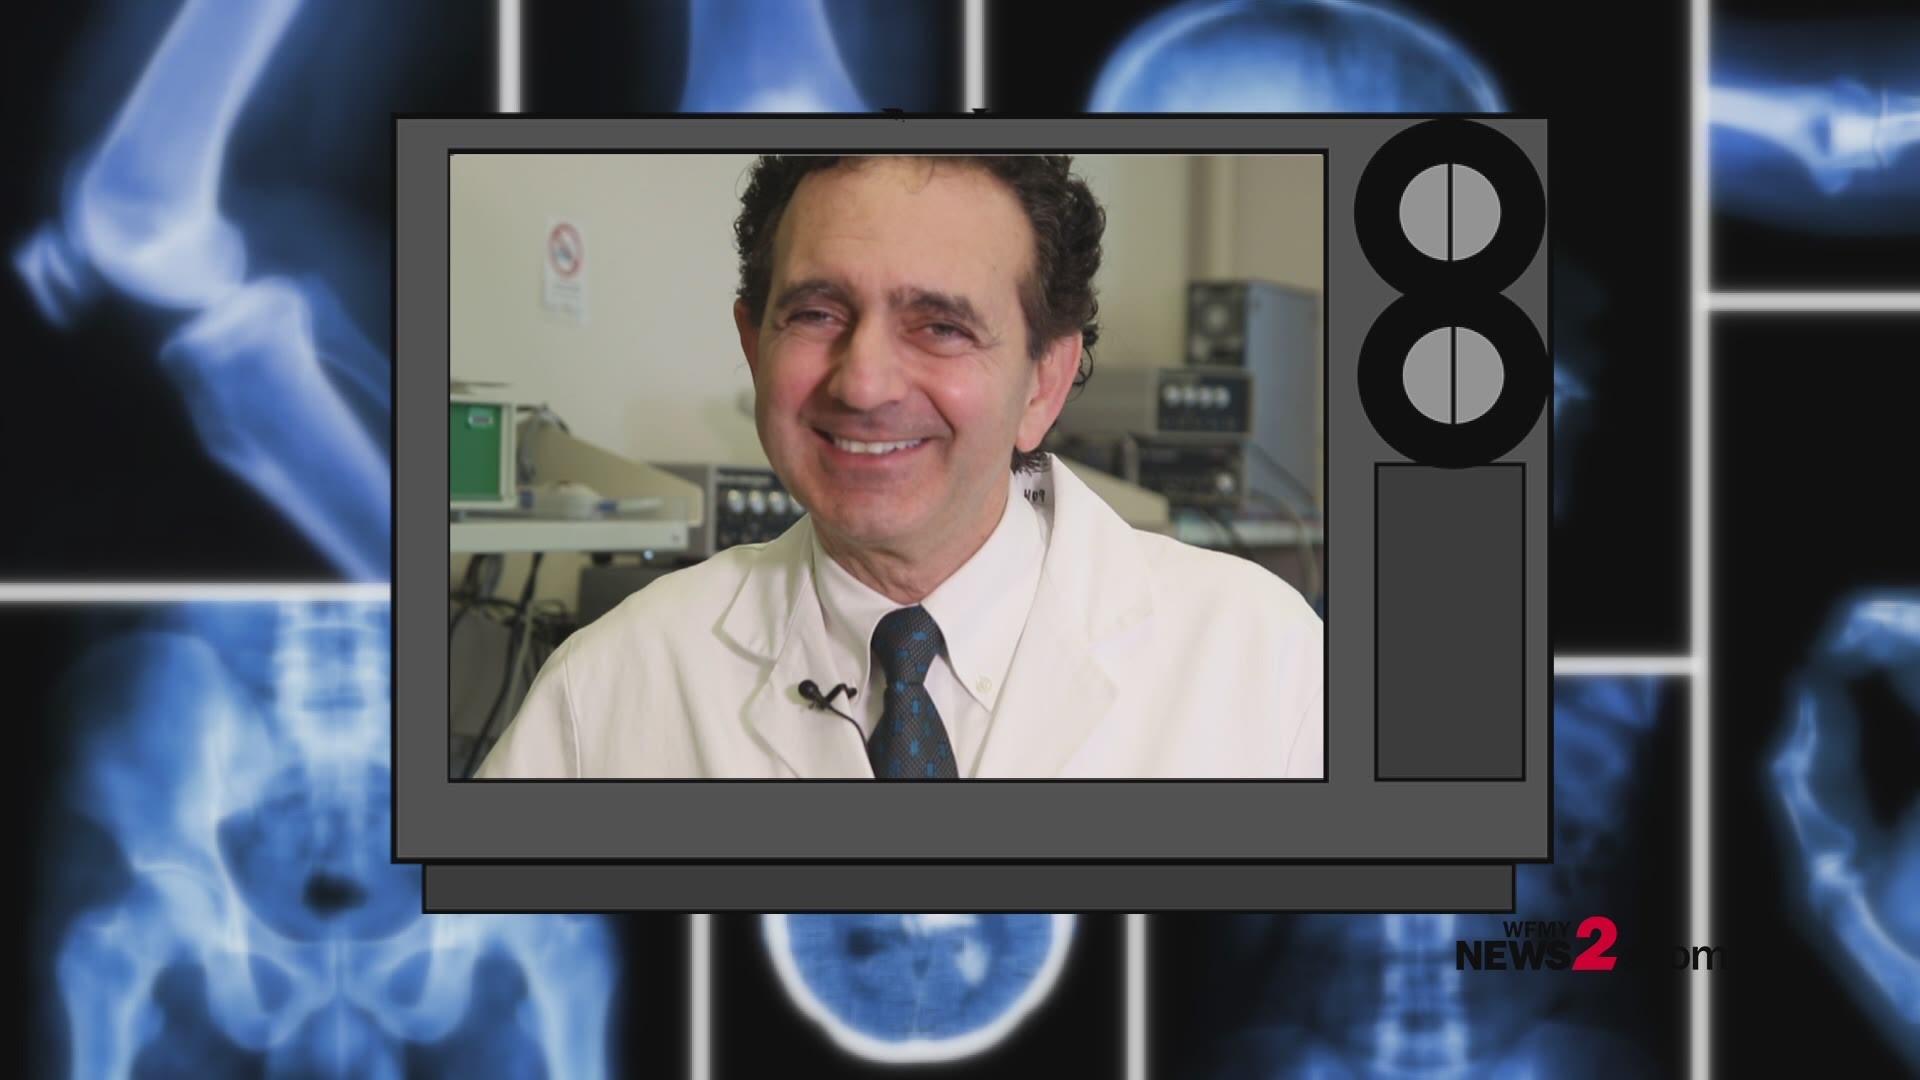 "We create tissues and organs in the lab that can be used in patients," said Dr. Anthony Atala, the head of the Wake Forest Institute For Regenerative Medicine.